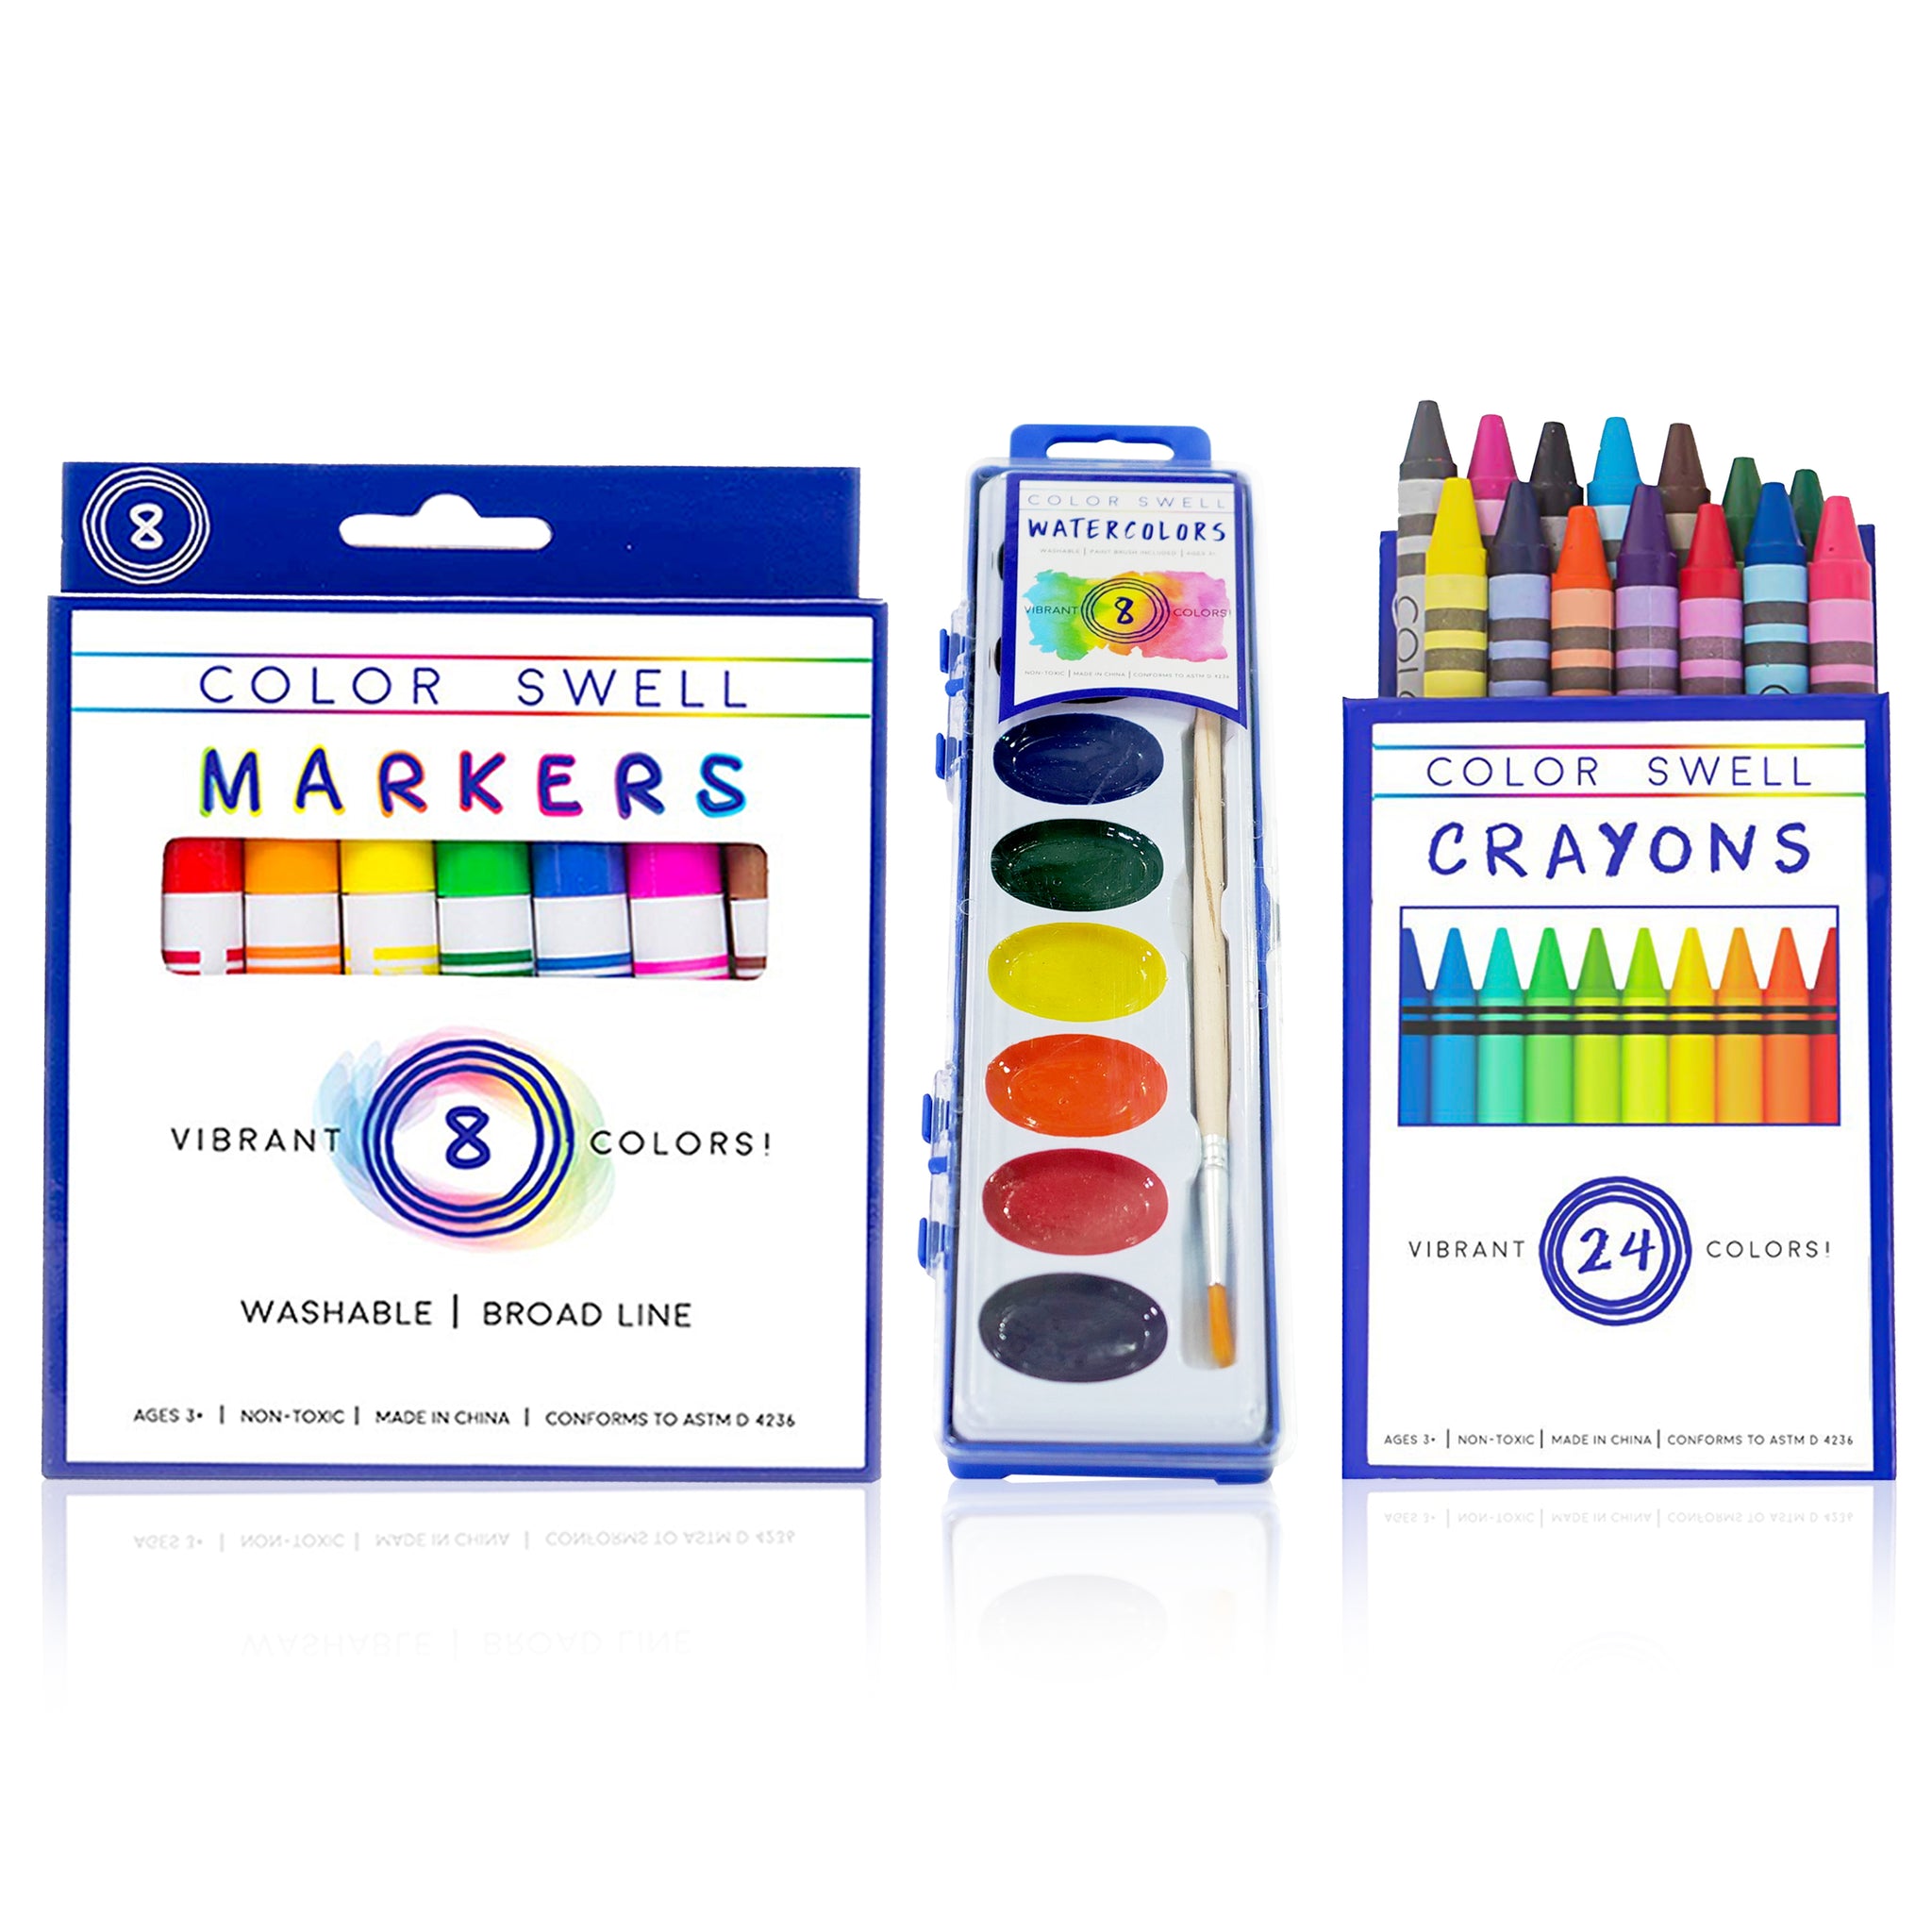 Color Swell Bulk Art Supplies 12 Packs of Broad Line Markers